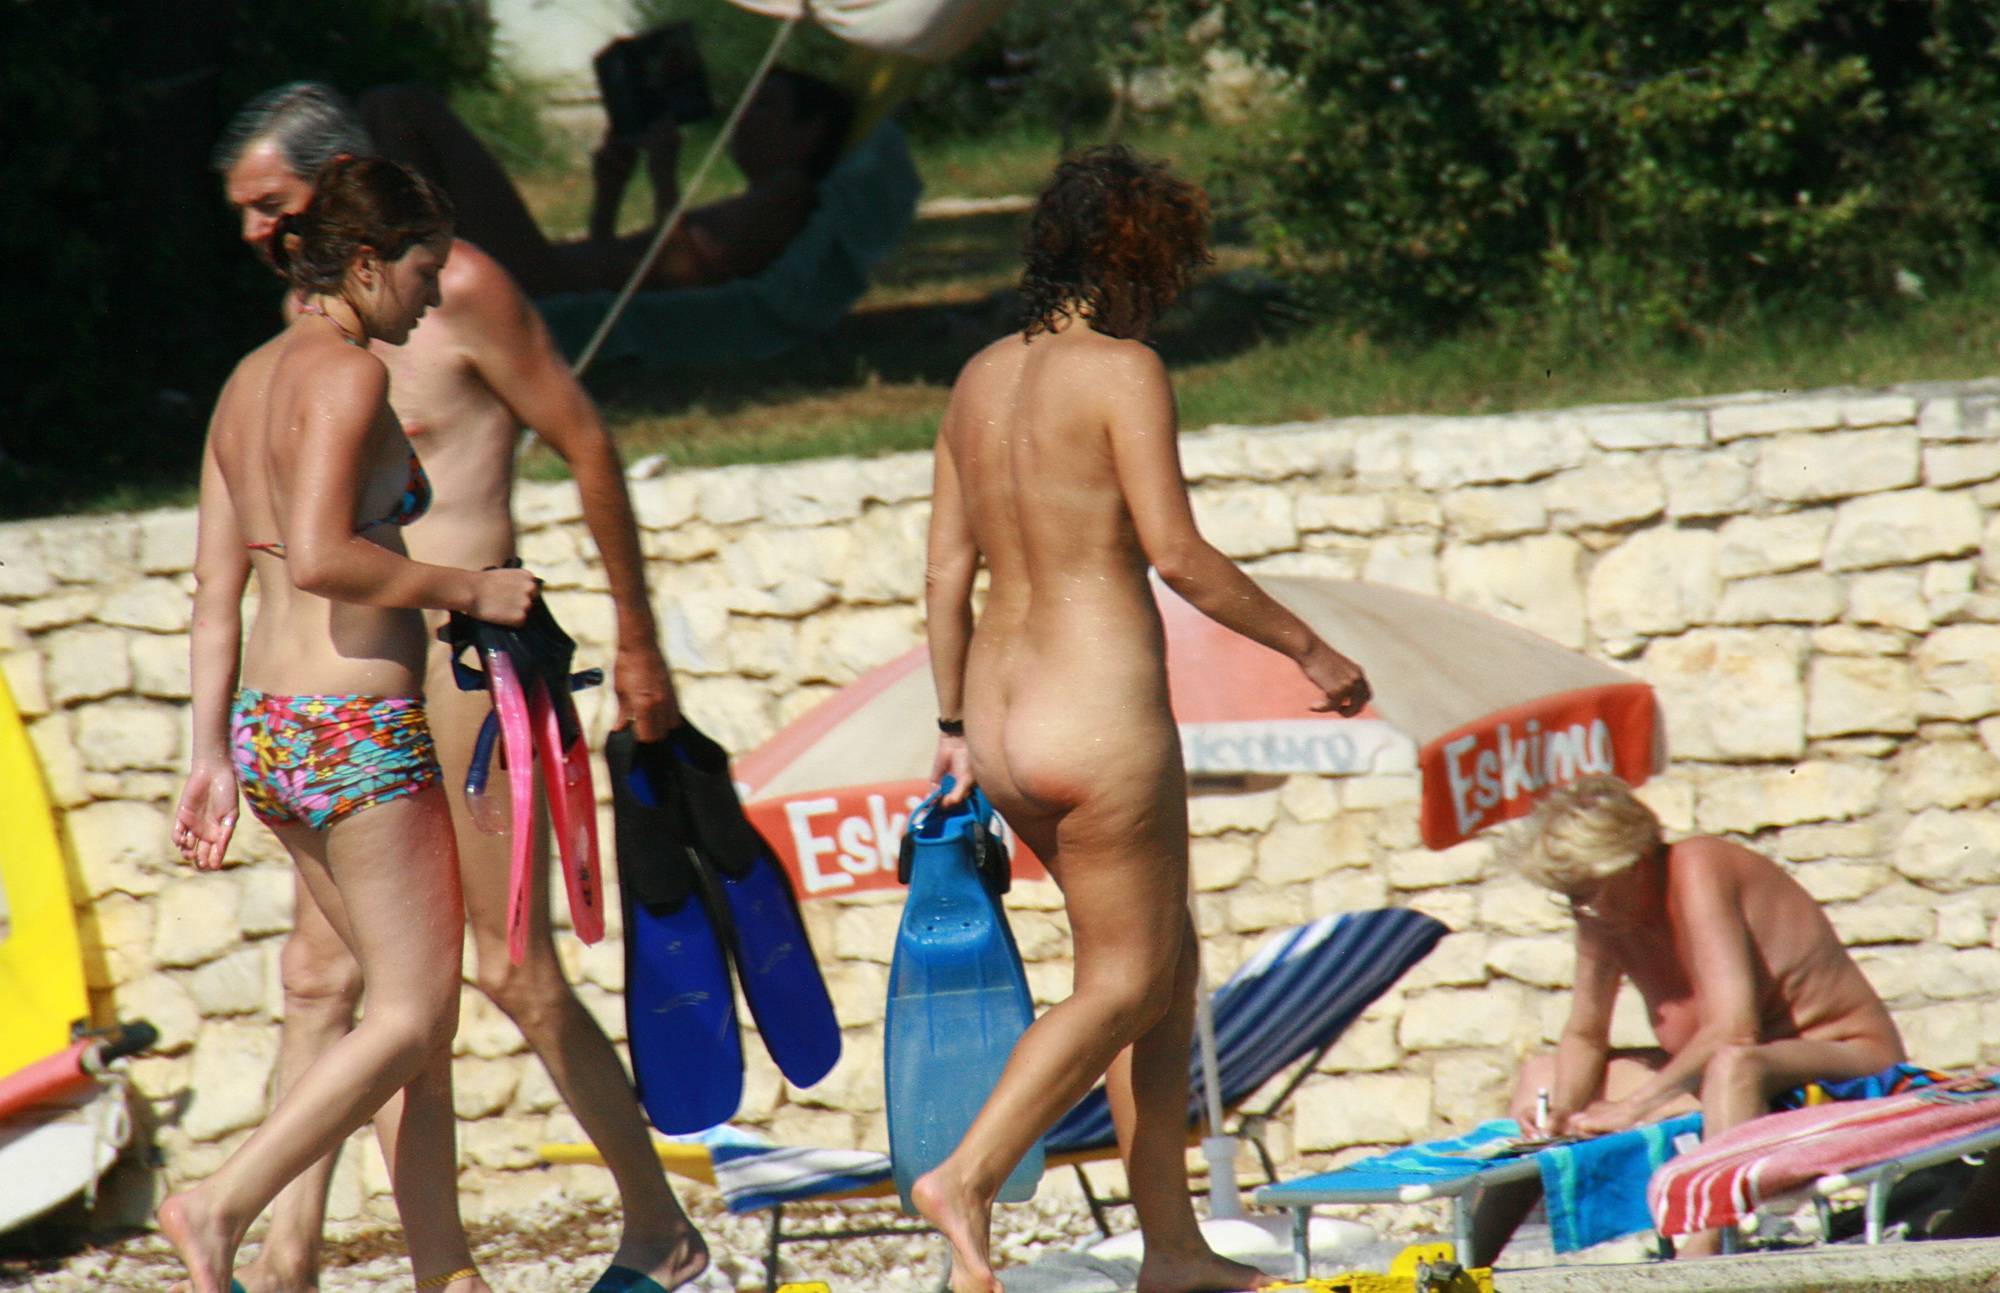 Pure Nudism Images Natural Tanning Is Best - 2